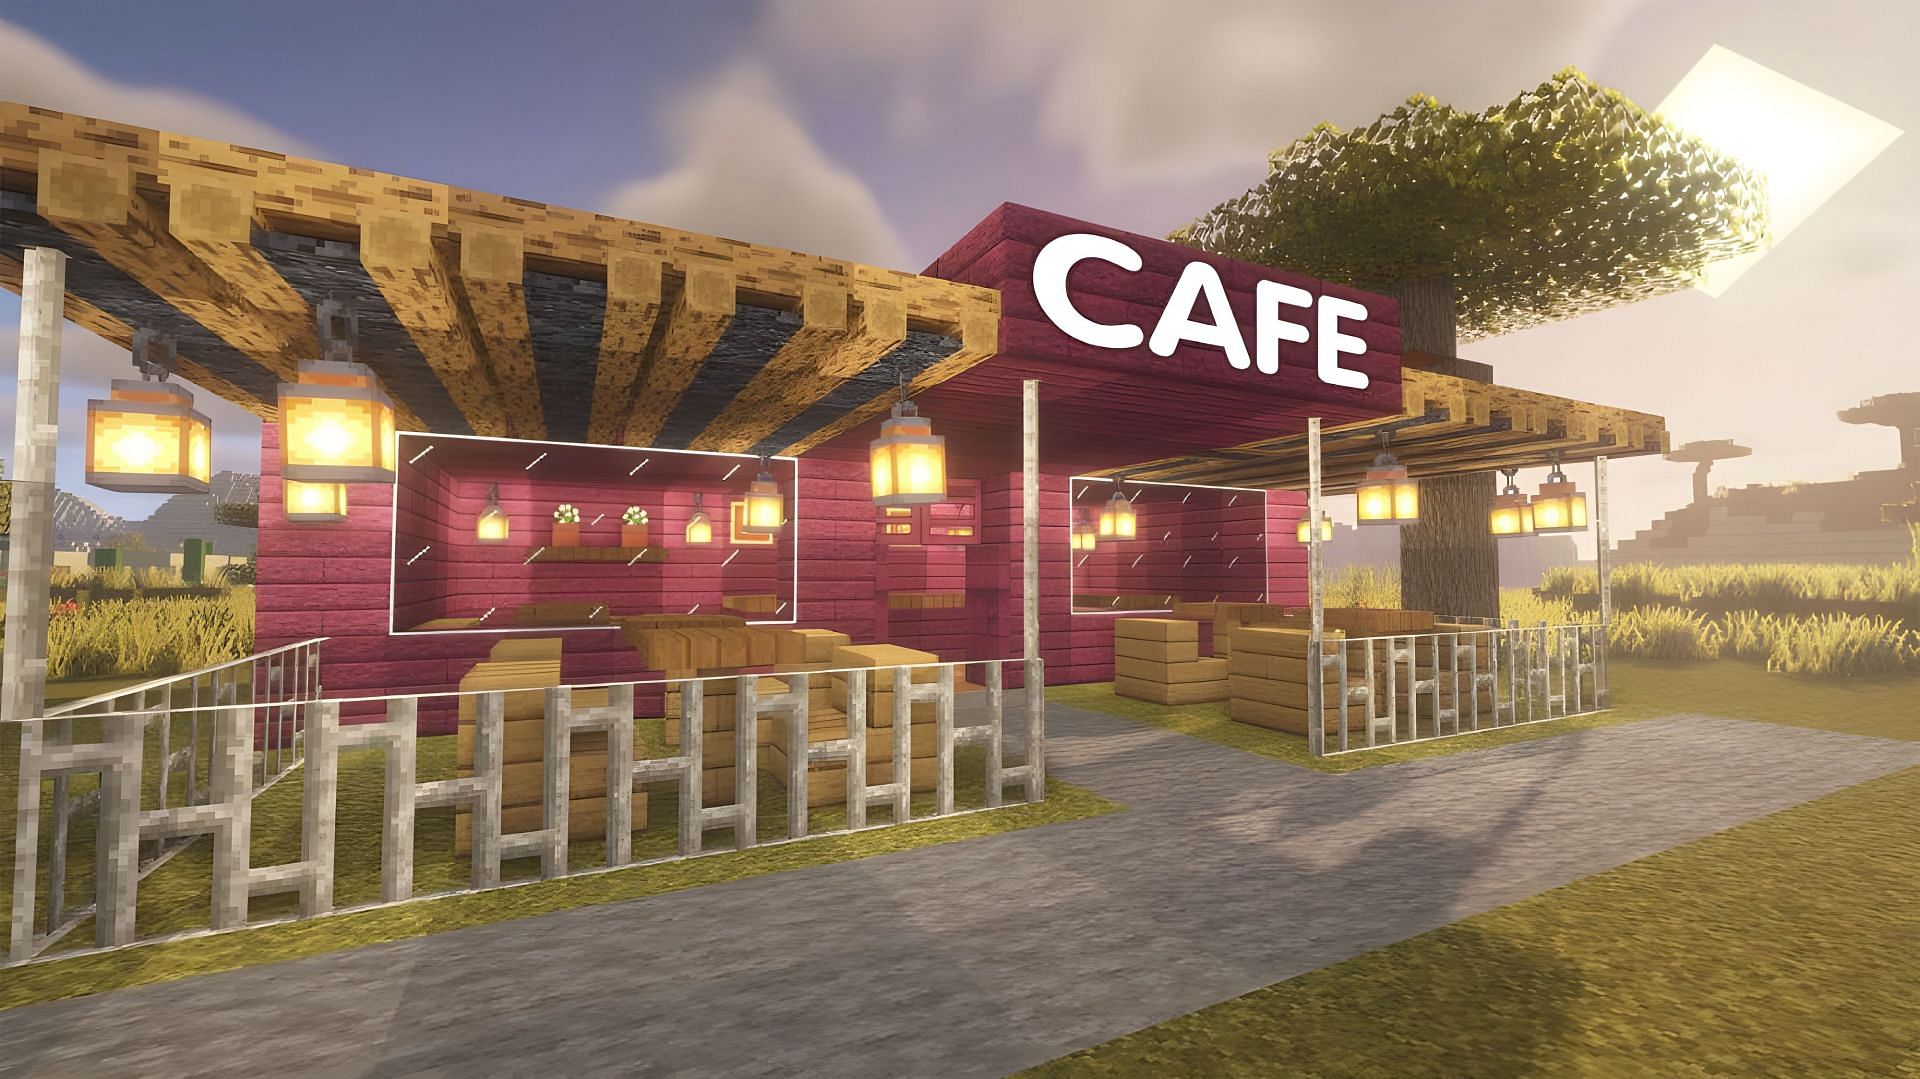 Cafes are beautiful structures to build in Minecraft (Image via Youtube/HALNY)